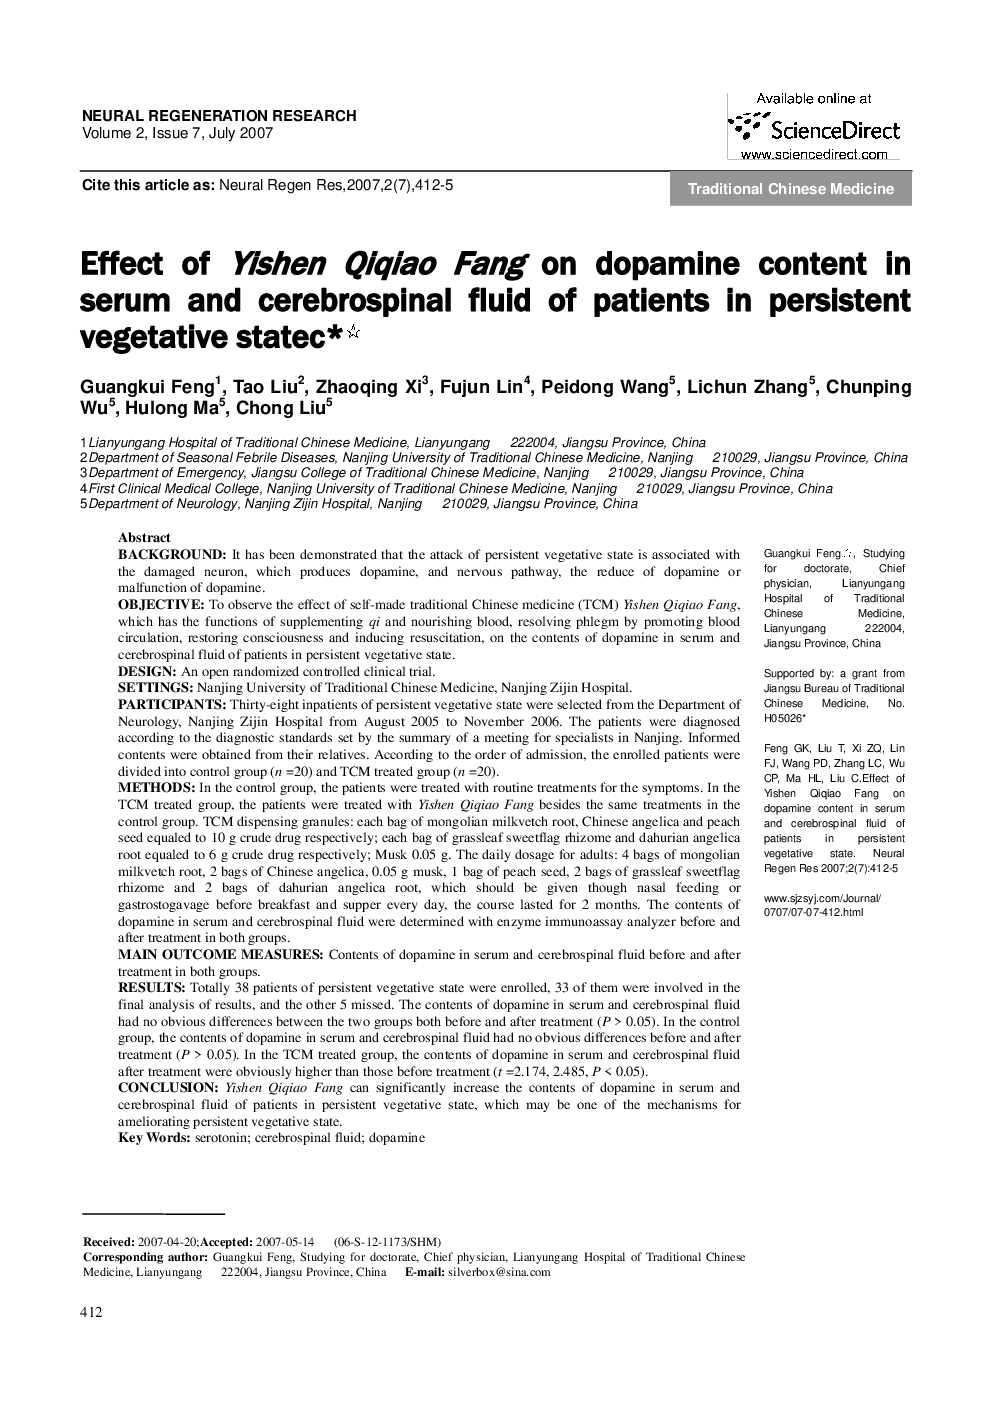 Effect of Yishen Qiqiao Fang on dopamine content in serum and cerebrospinal fluid of patients in persistent vegetative statec*